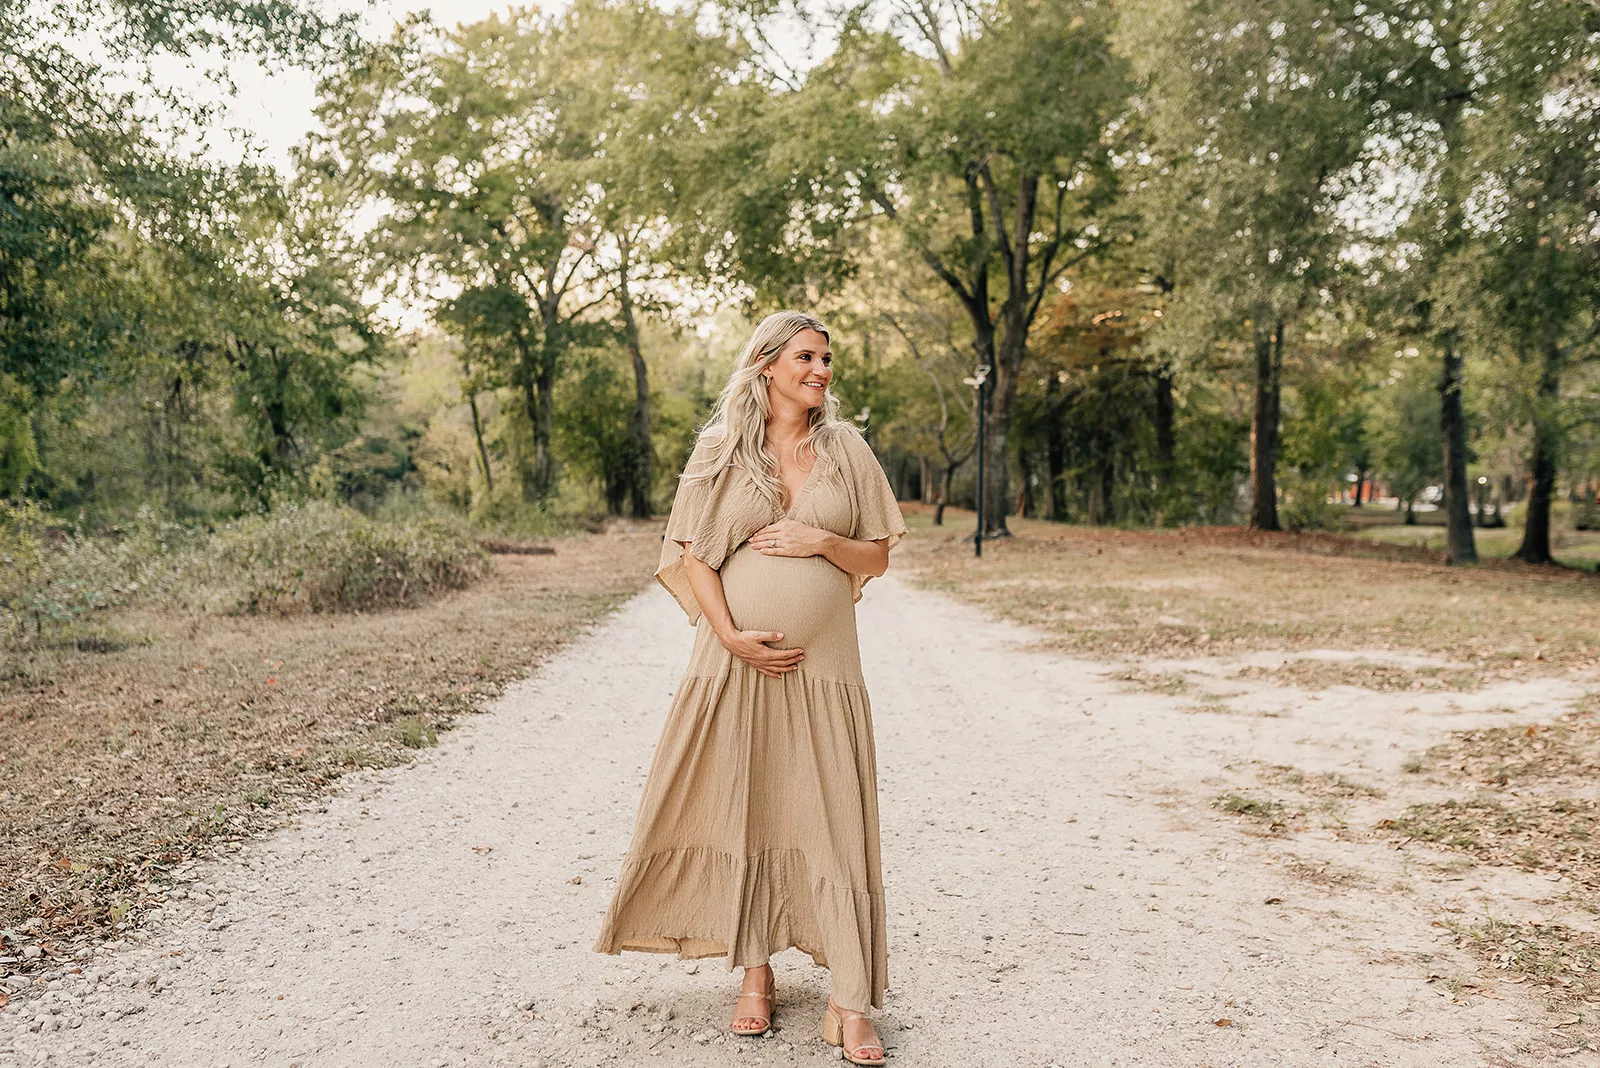 A happy mother to be stands in a park path holding her bump in a beige dress thanks to Houston Fertility Clinics